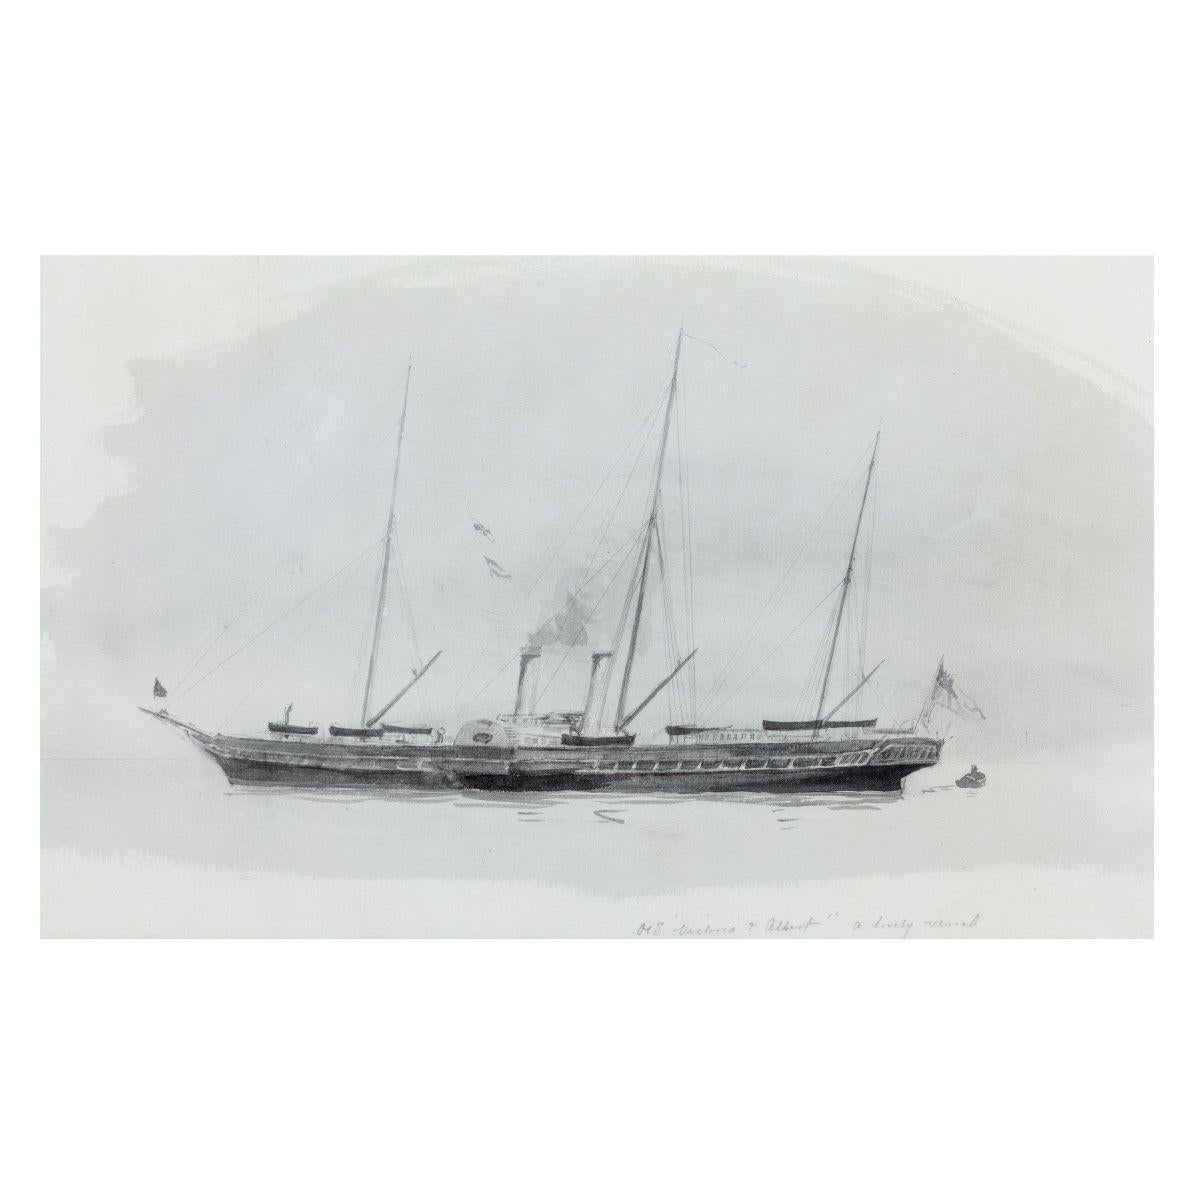 A working watercolor of the Royal yacht by Wyllie. Arguably the most beautiful paddle steamer and yacht ever built.
“Titled Victoria and Albert a lovely vessel.”

Overall size 17” x 21”.

Harold Wyllie was the eldest son of William Lionel